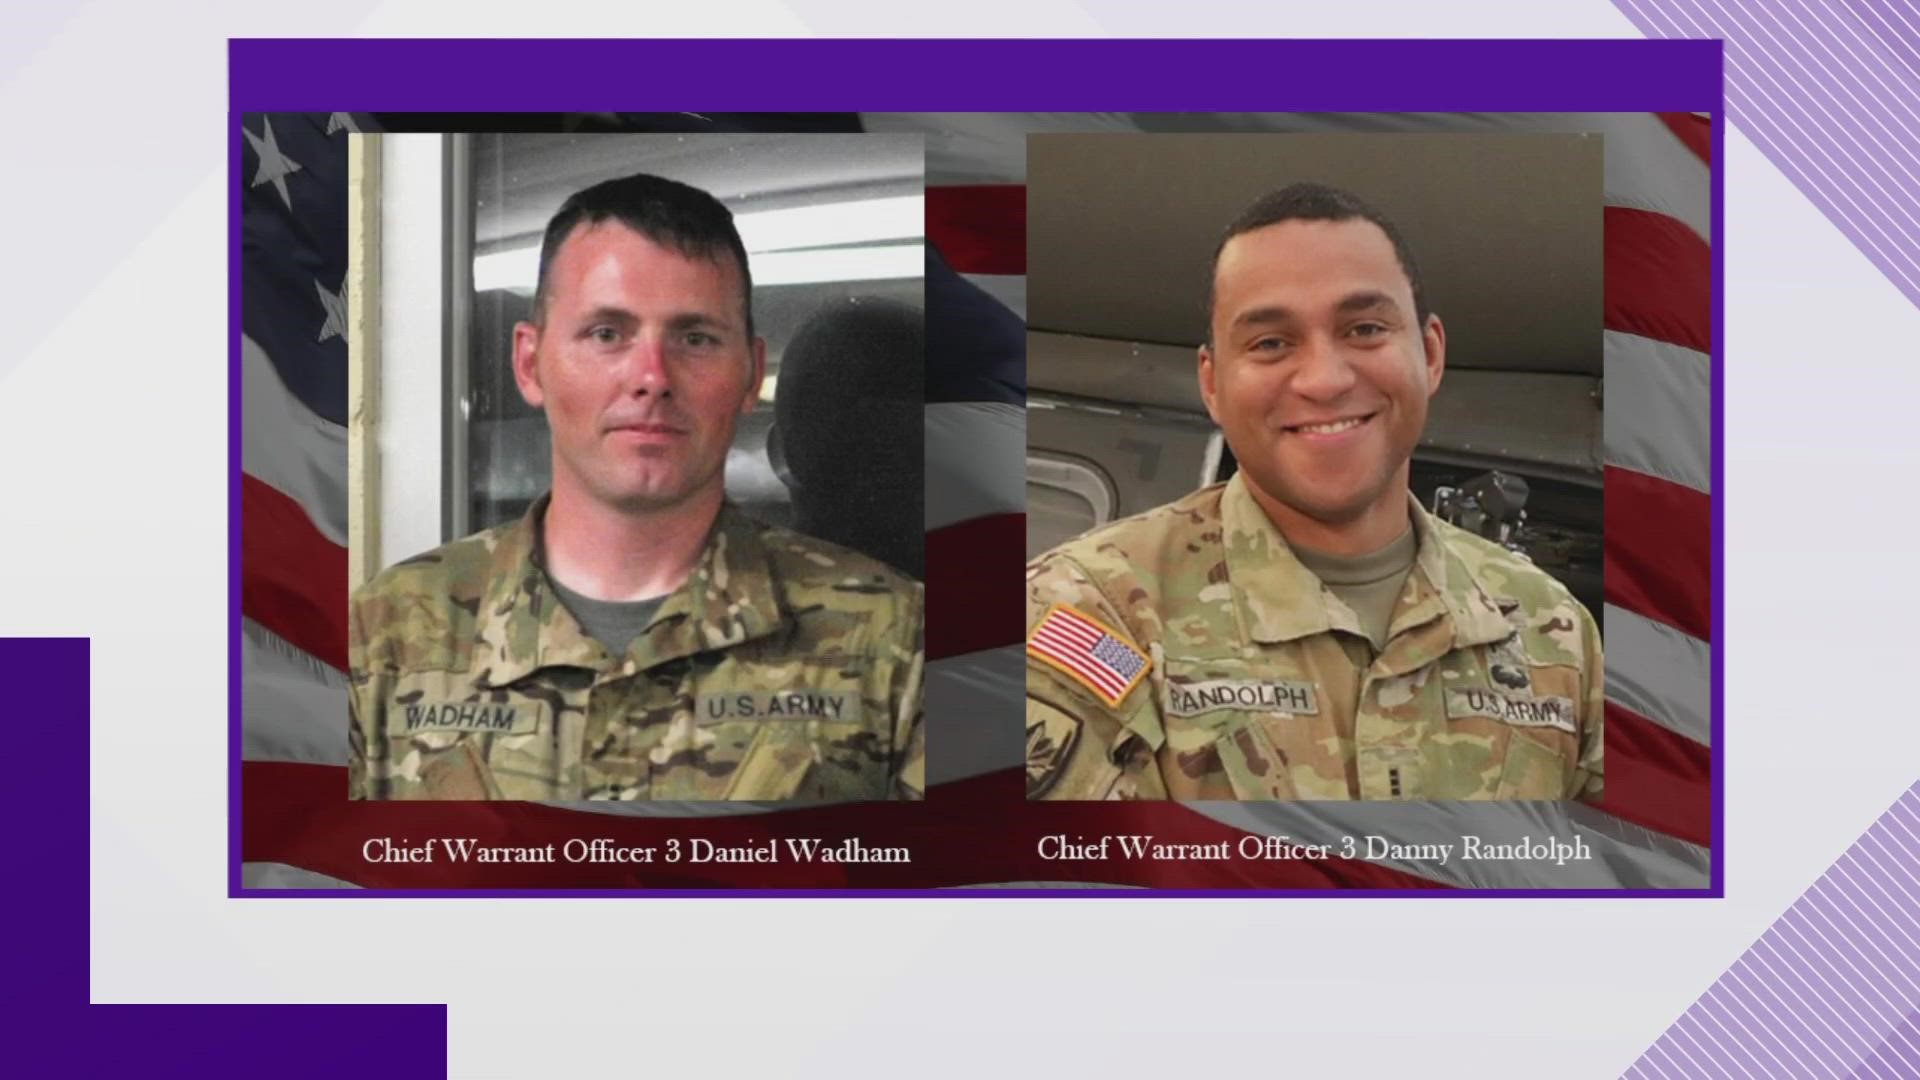 The names of the two Tennessee National Guard soldiers are Daniel Wadham and Danny Randolph. Both men are from middle Tennessee.